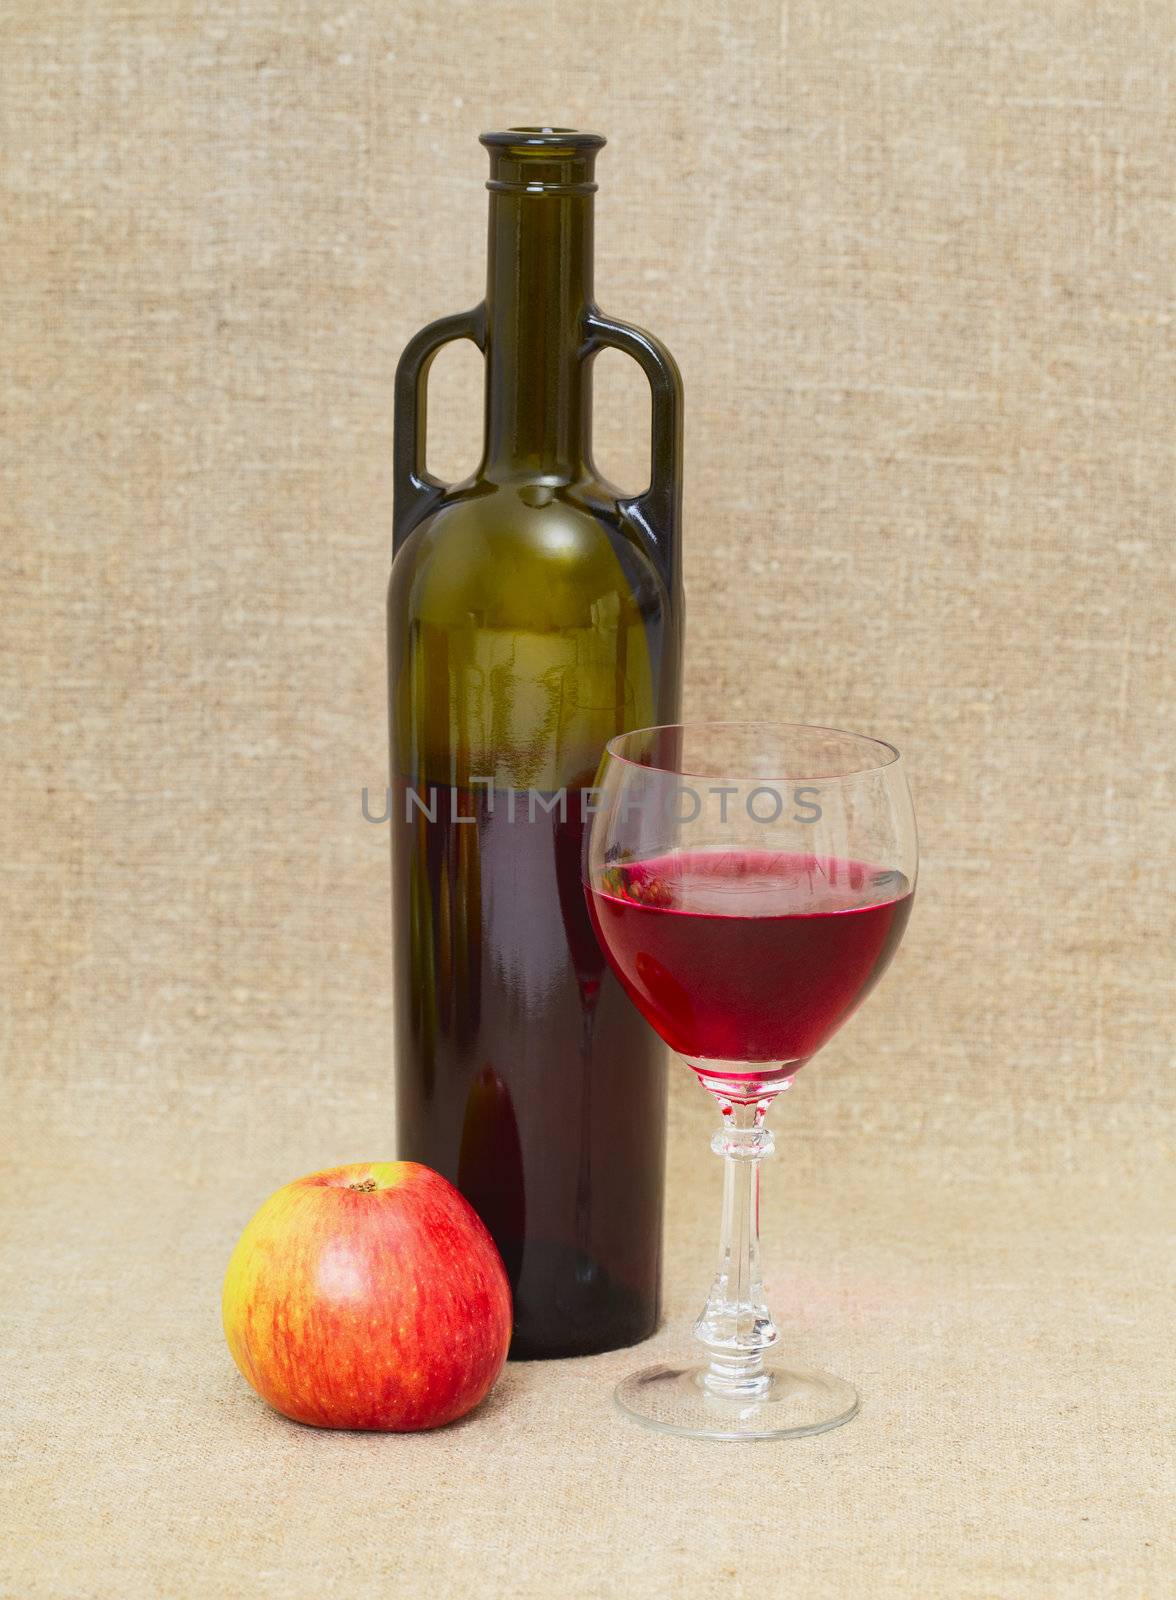 Still life with green bottle, apple and glass on canvas background